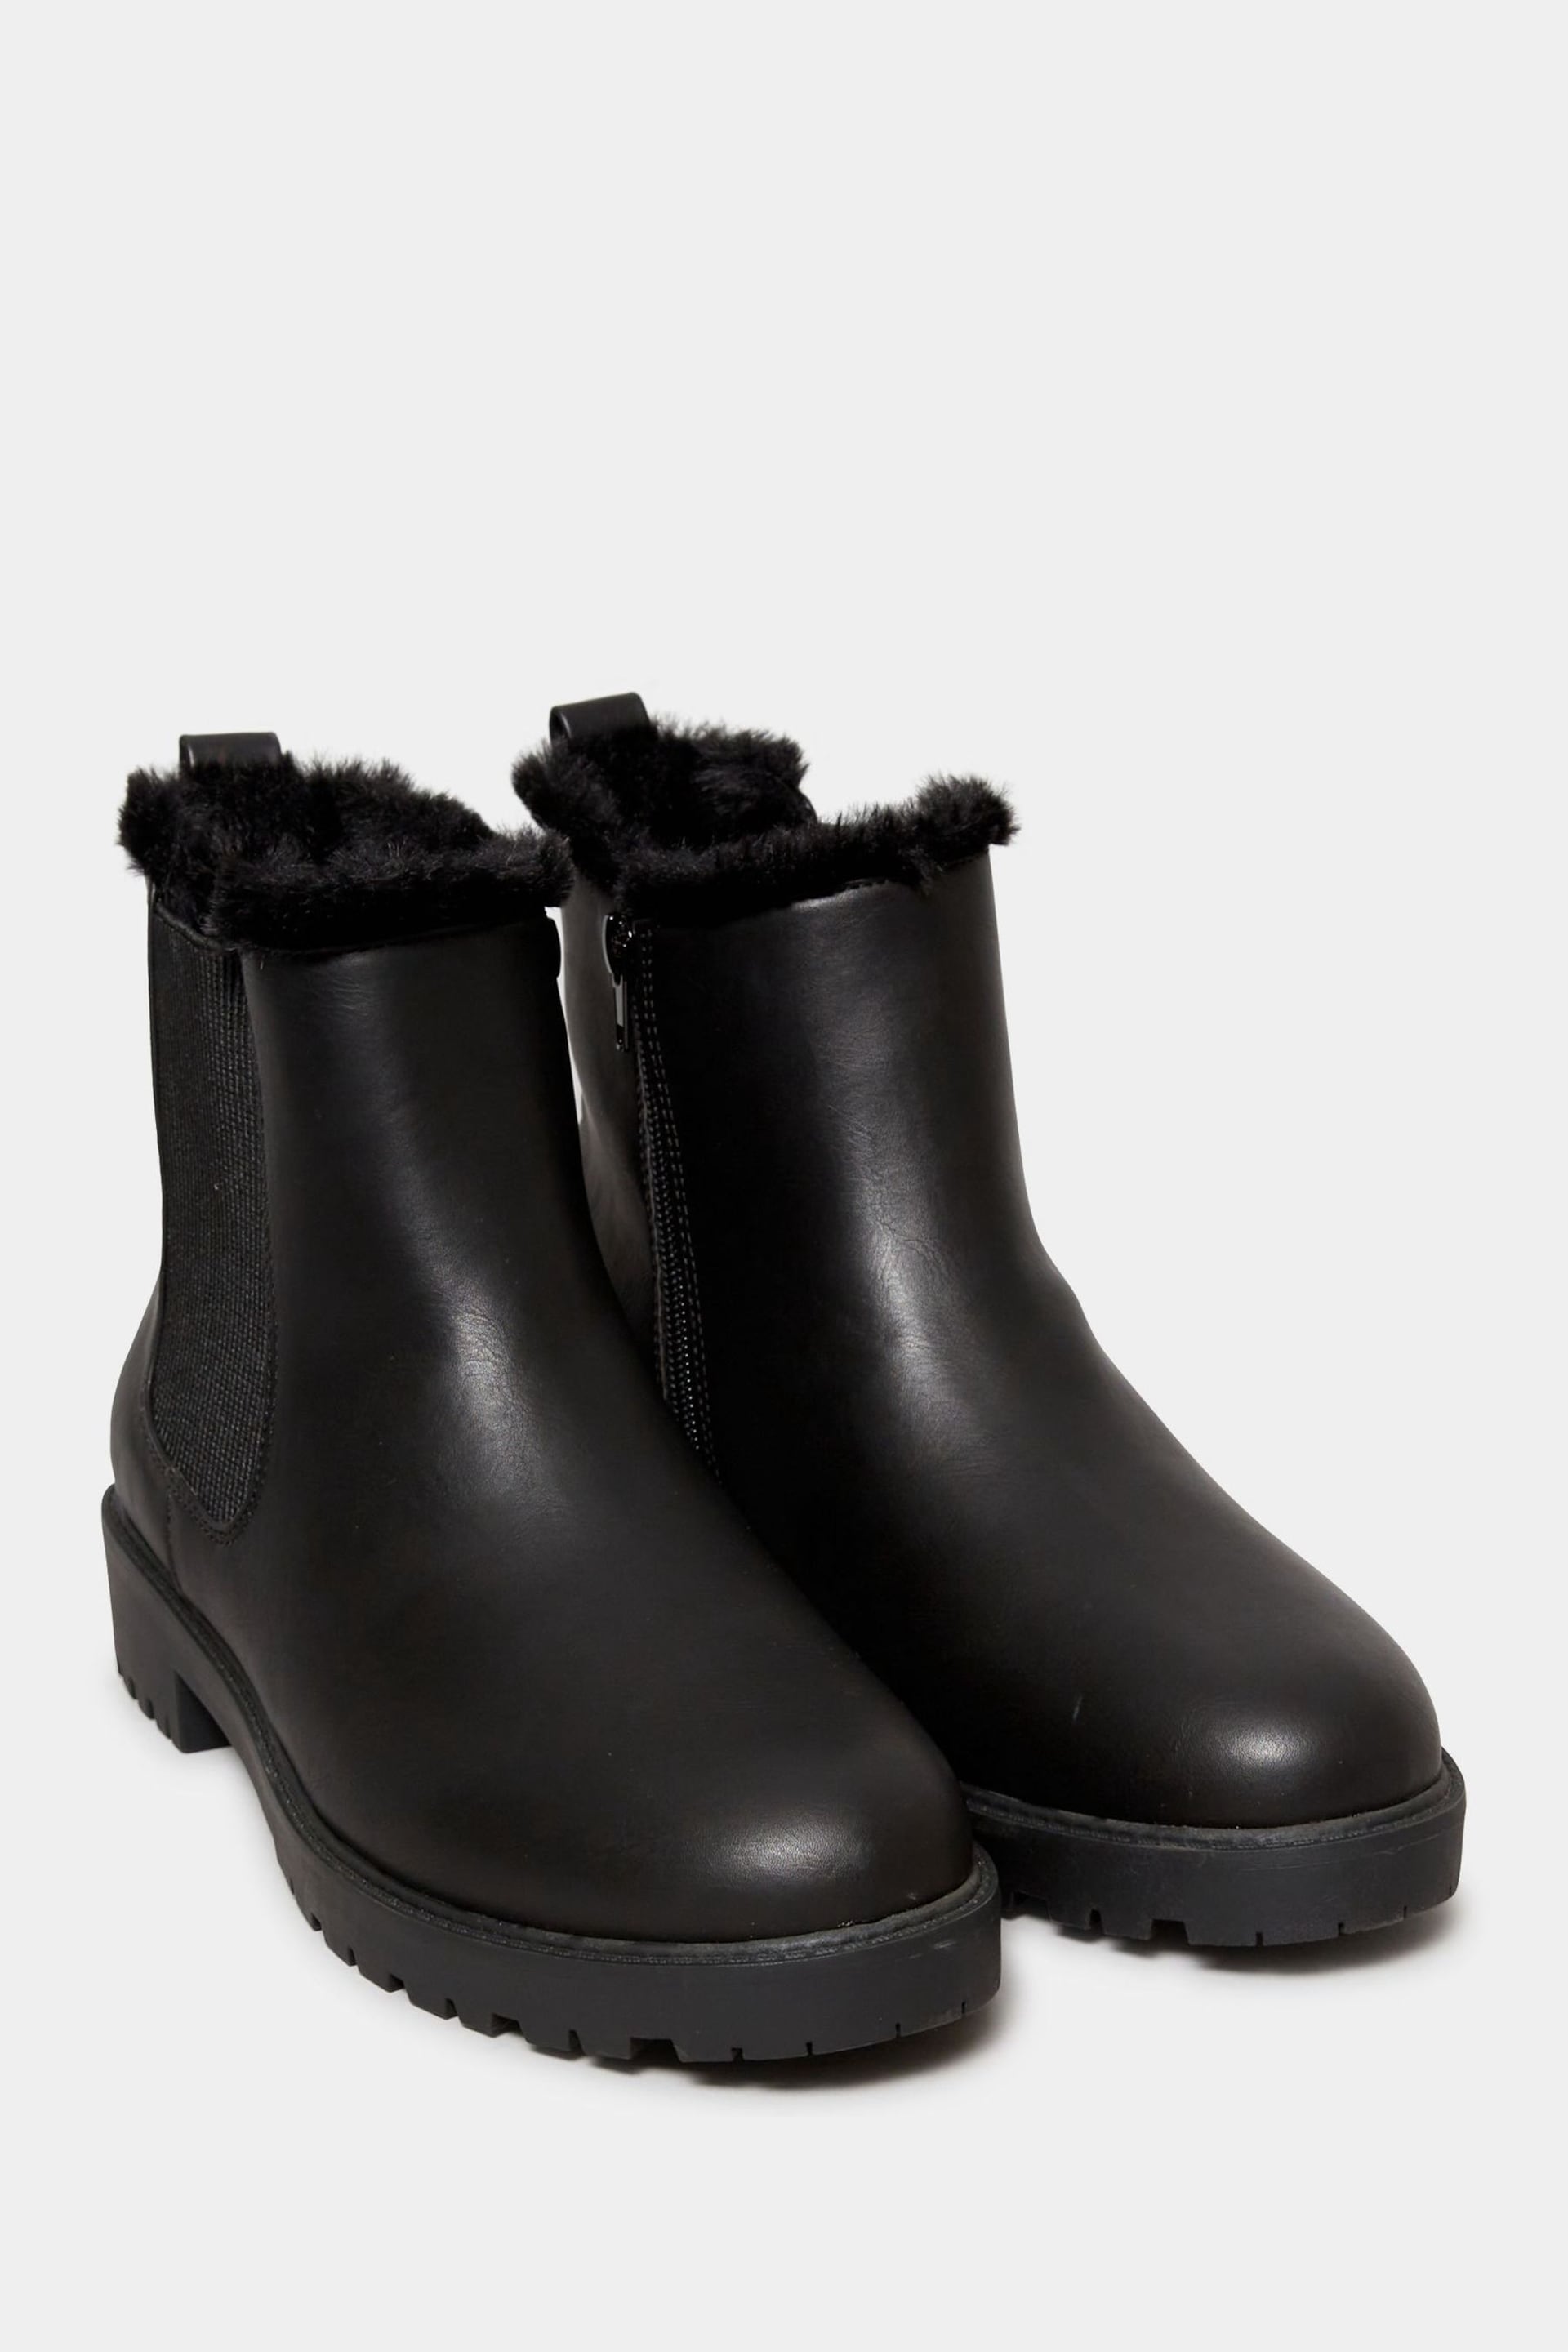 Yours Curve Black Wide Fit Chelsea Faux Fur Lined Boots - Image 2 of 5